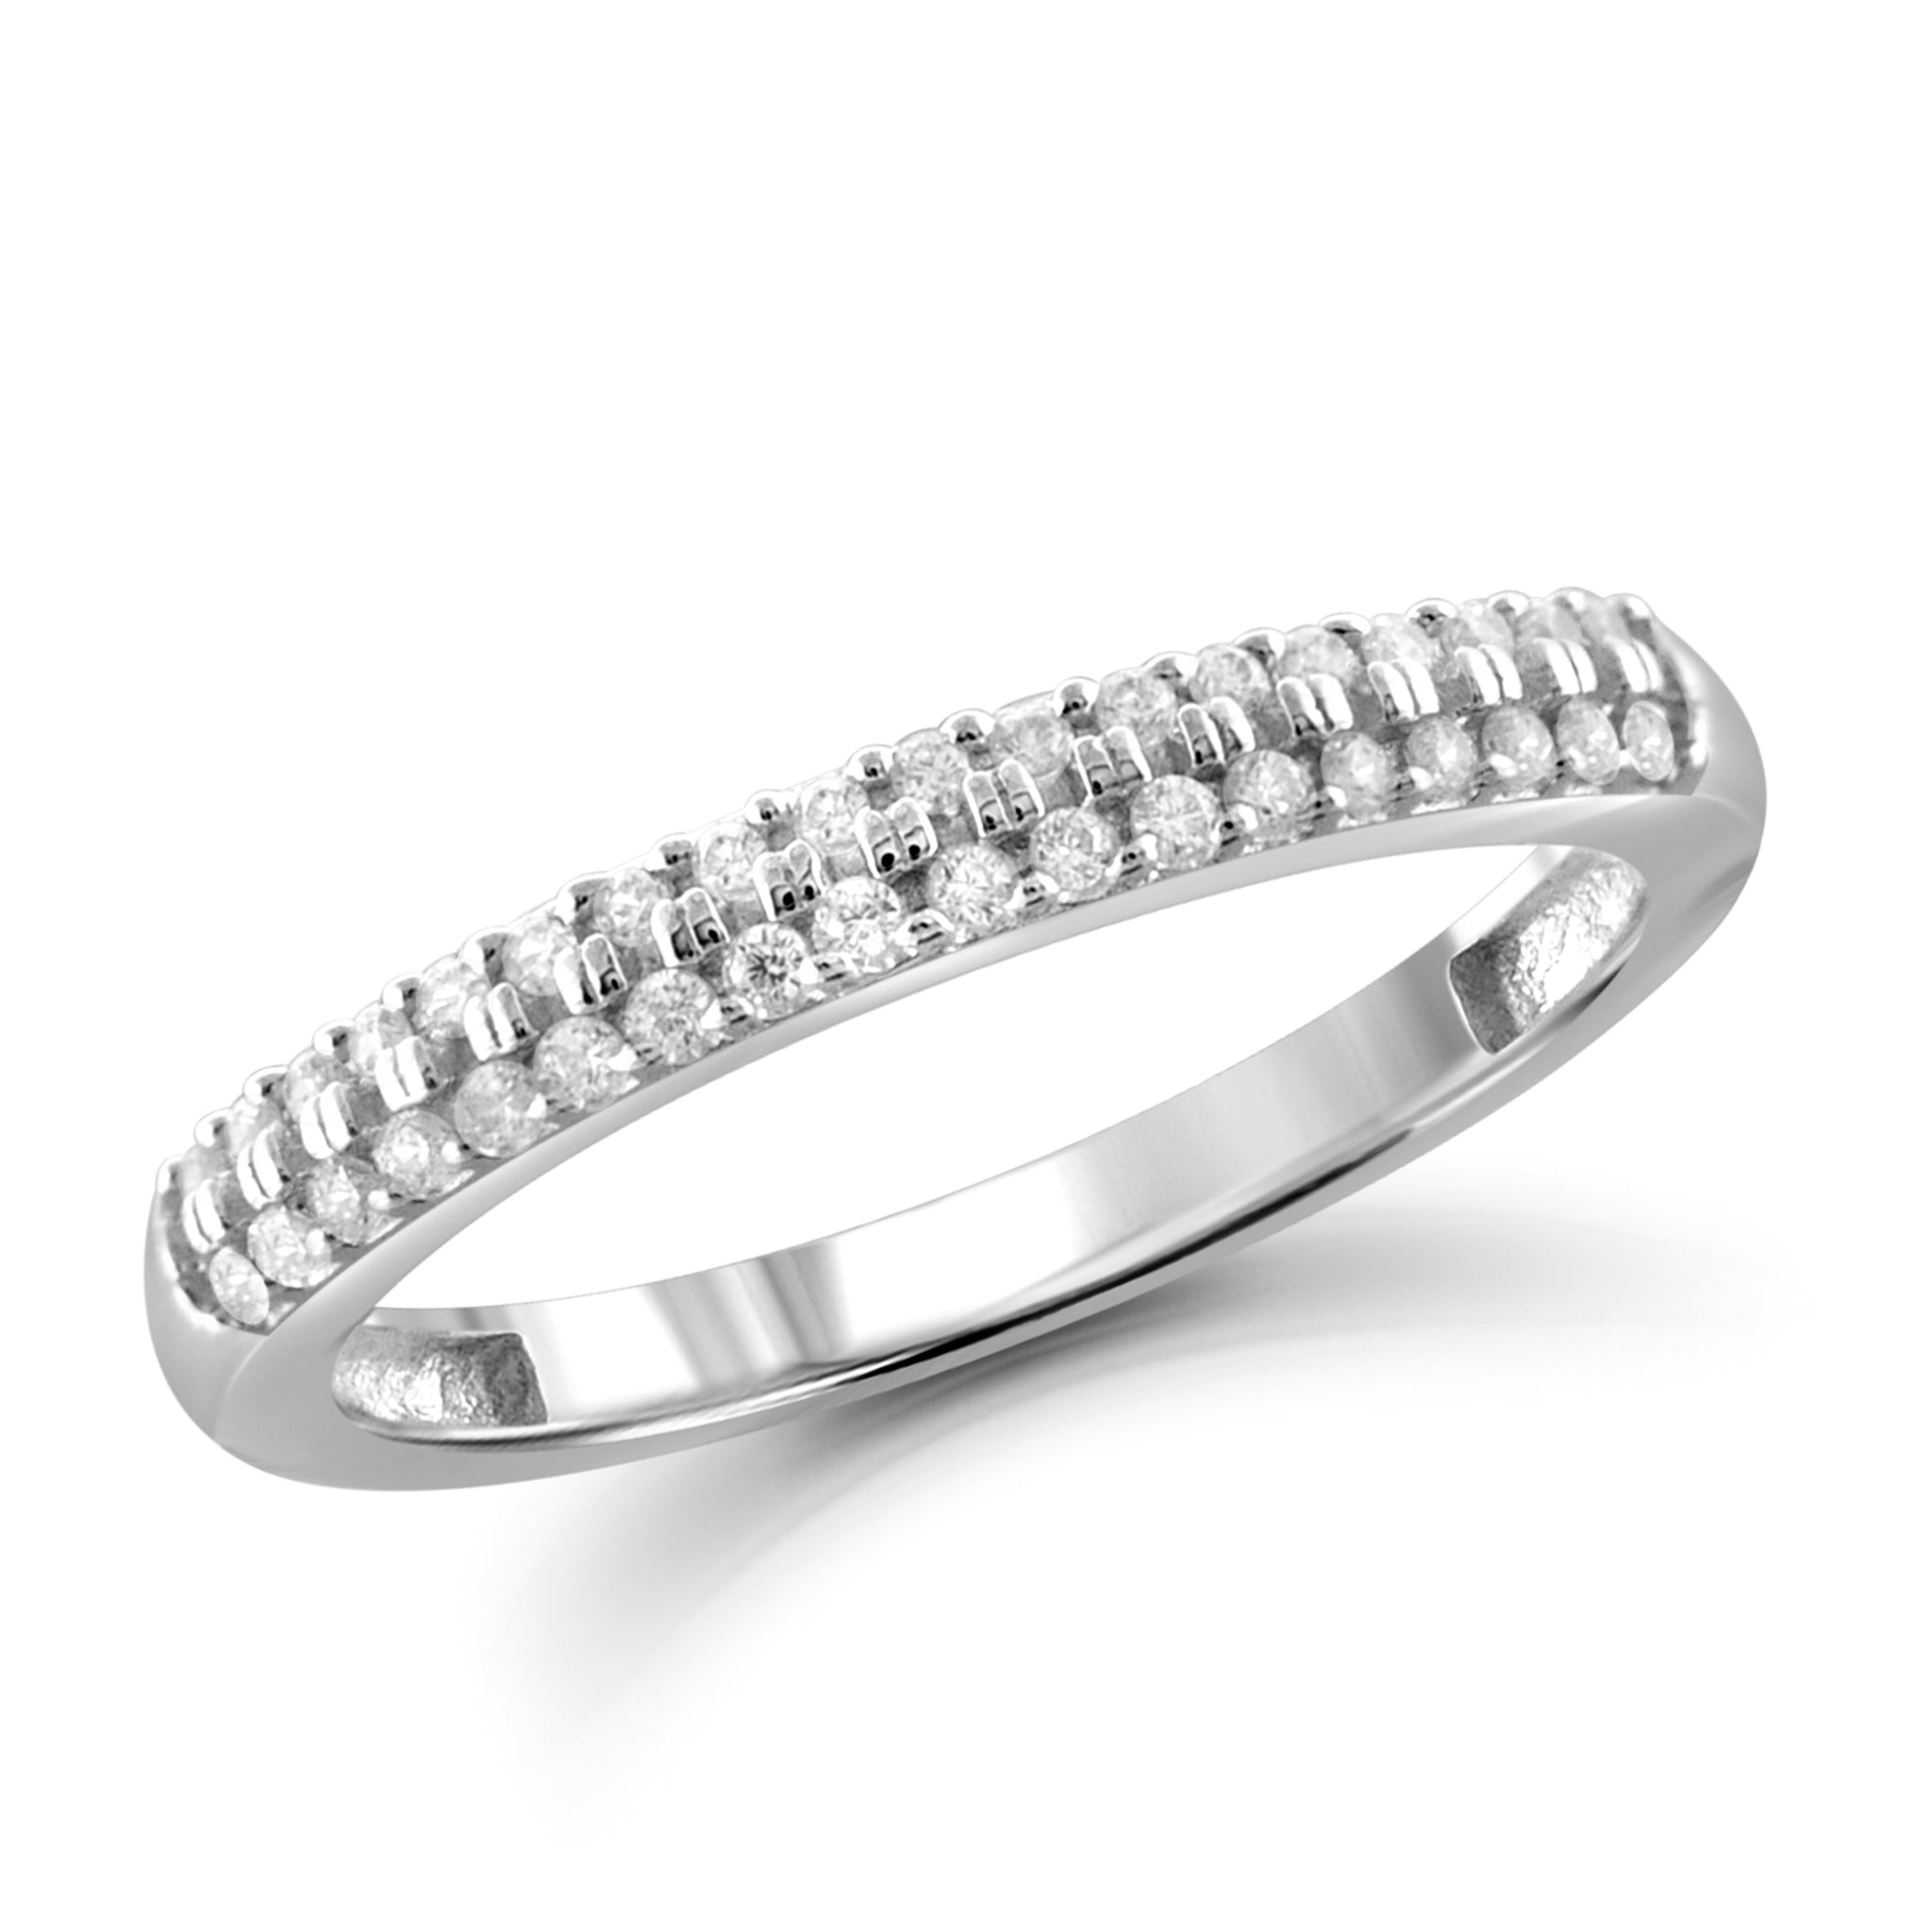 JewelonFire 1/4 Carat T.W. White Diamond Sterling Silver Wedding Band - Assorted Colors